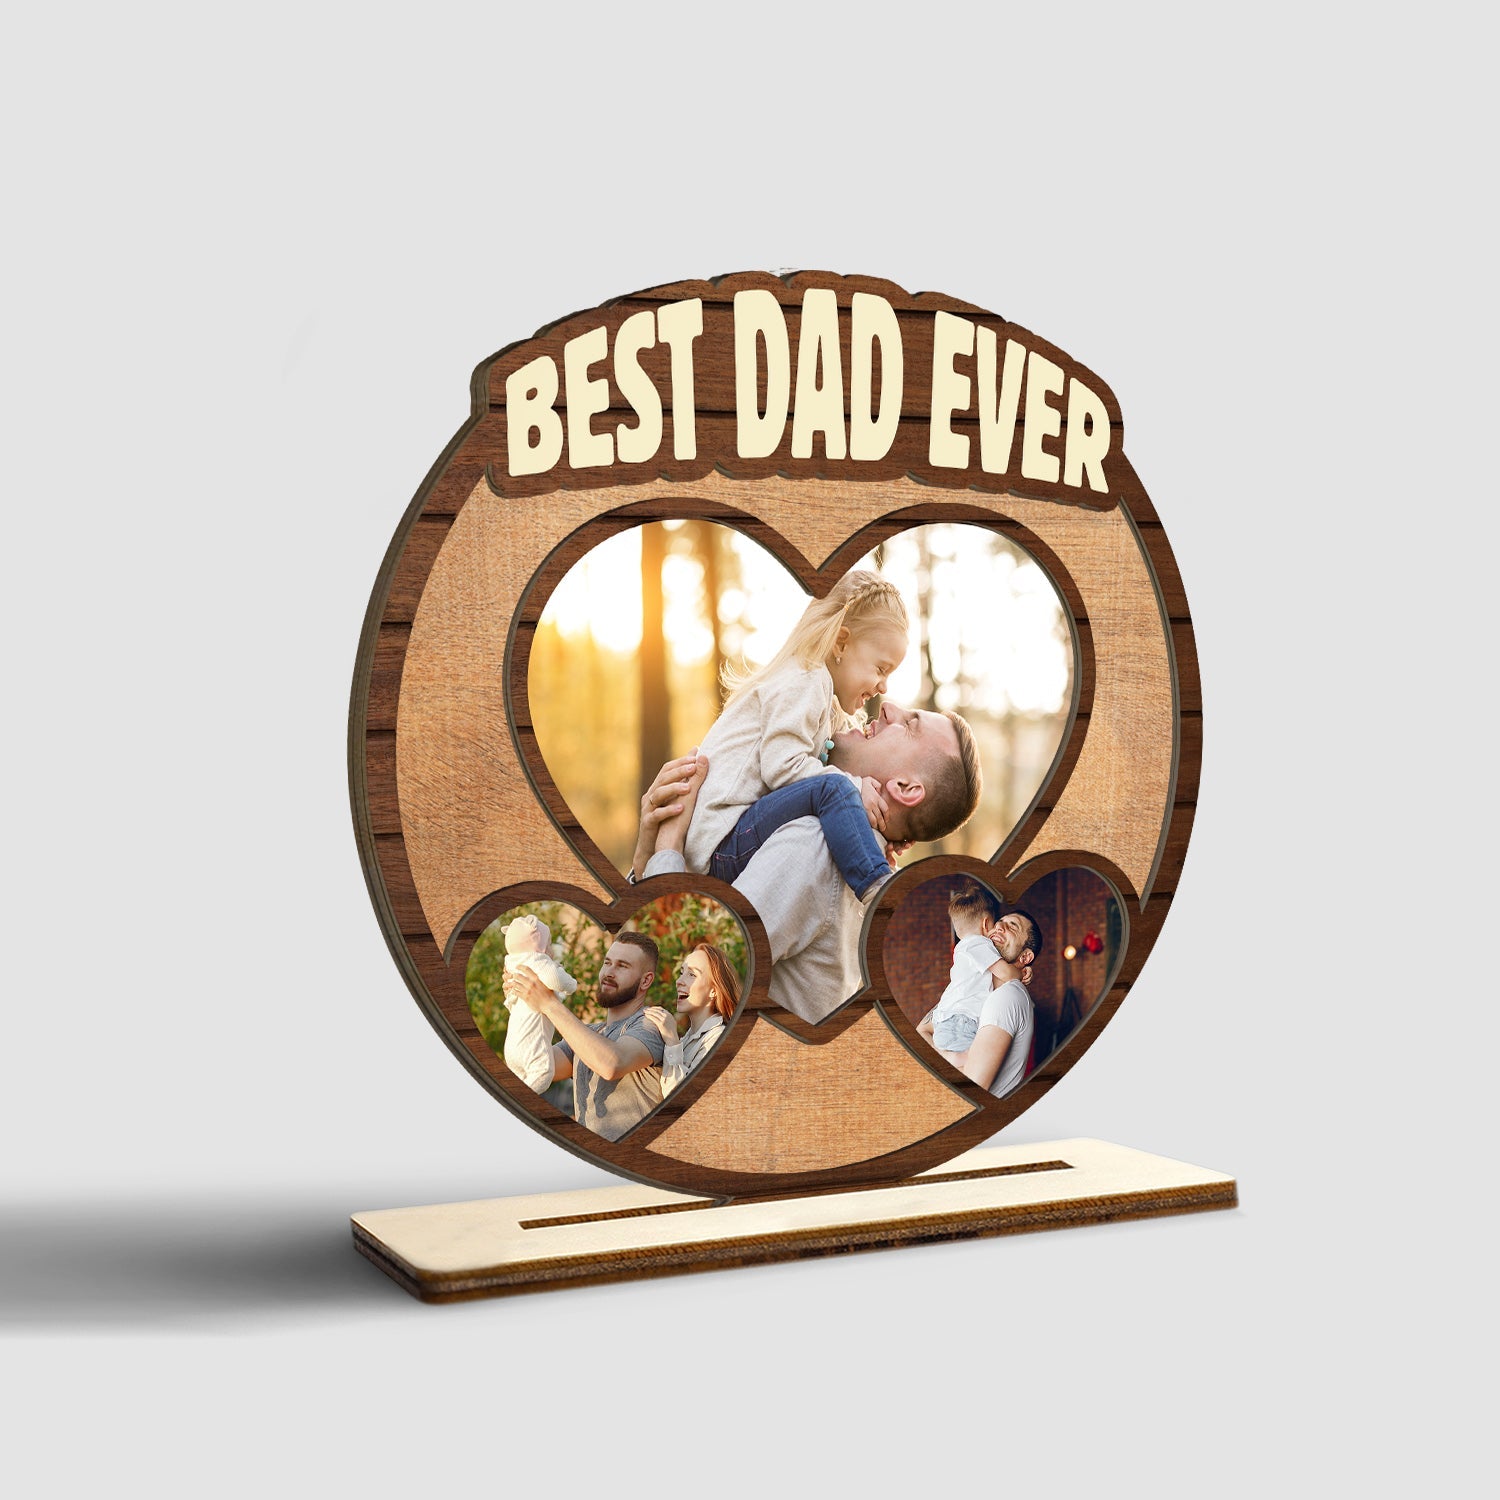 Best Dad Ever, Custom Photo, 3 Heart Shape, Wooden Plaque 3 Layers